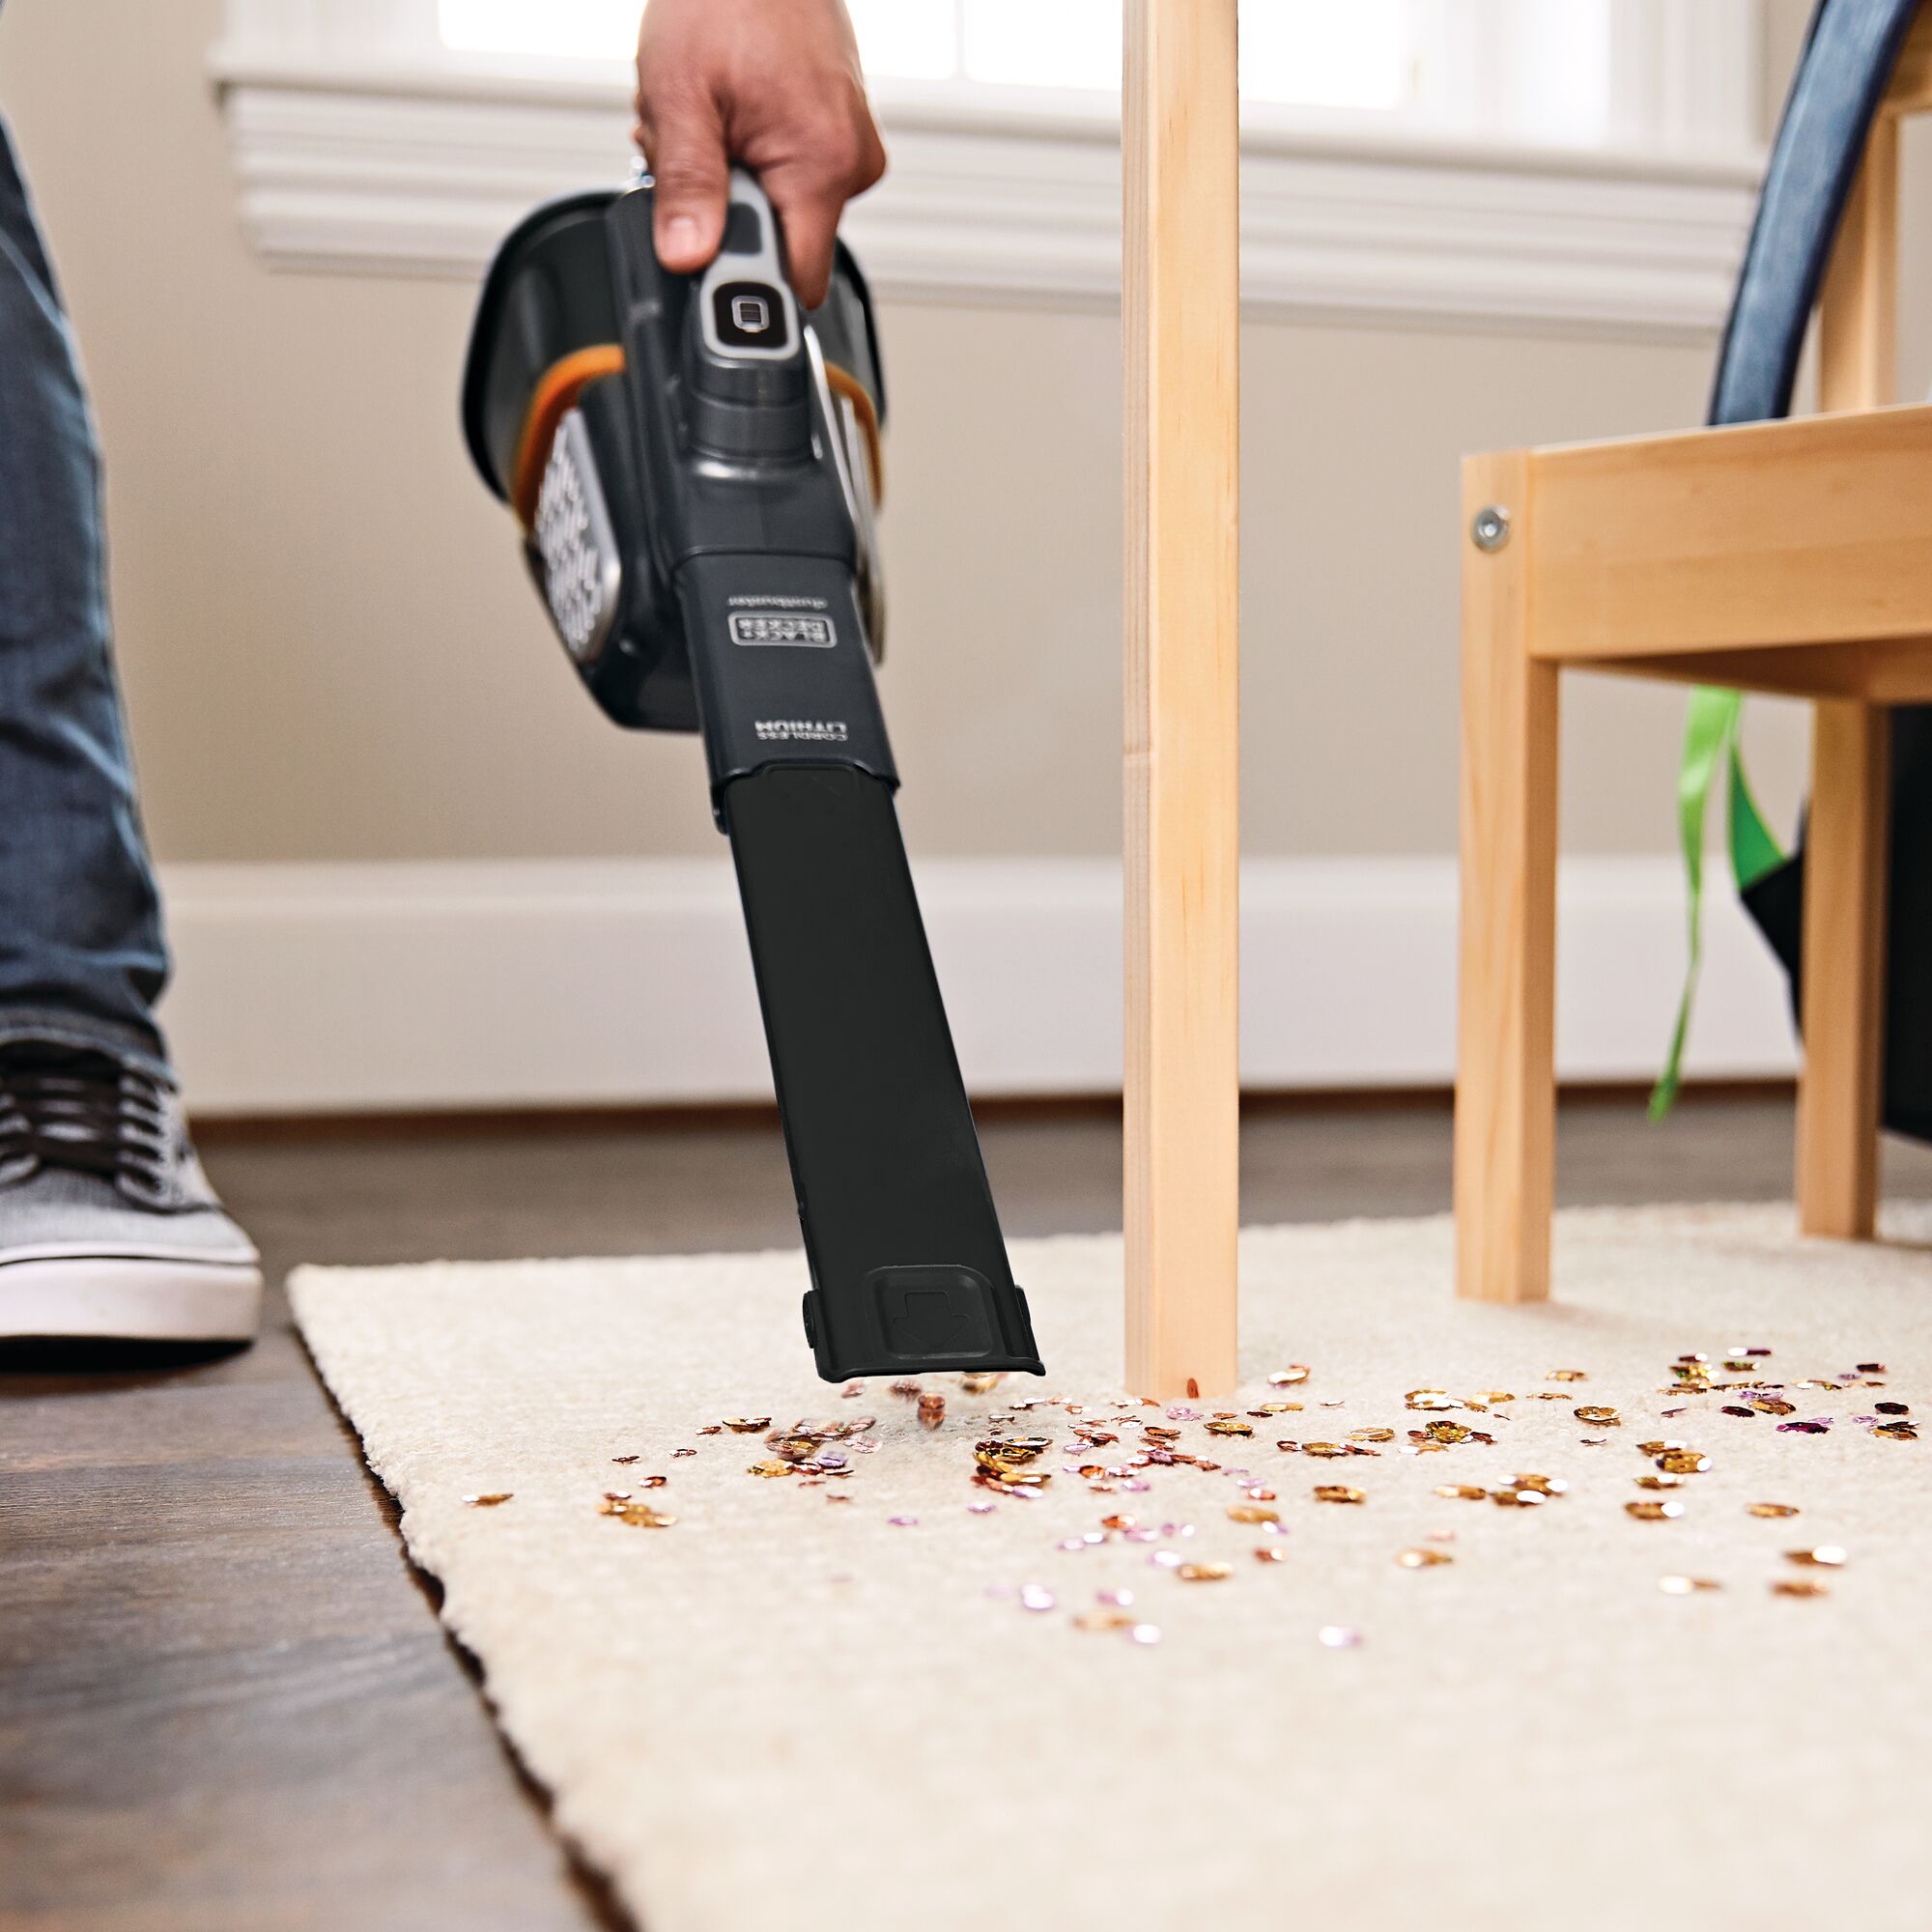 16 volt max dustbuster advanced clean plus hand vacuum being used to vacuum spilled material from a carpet.